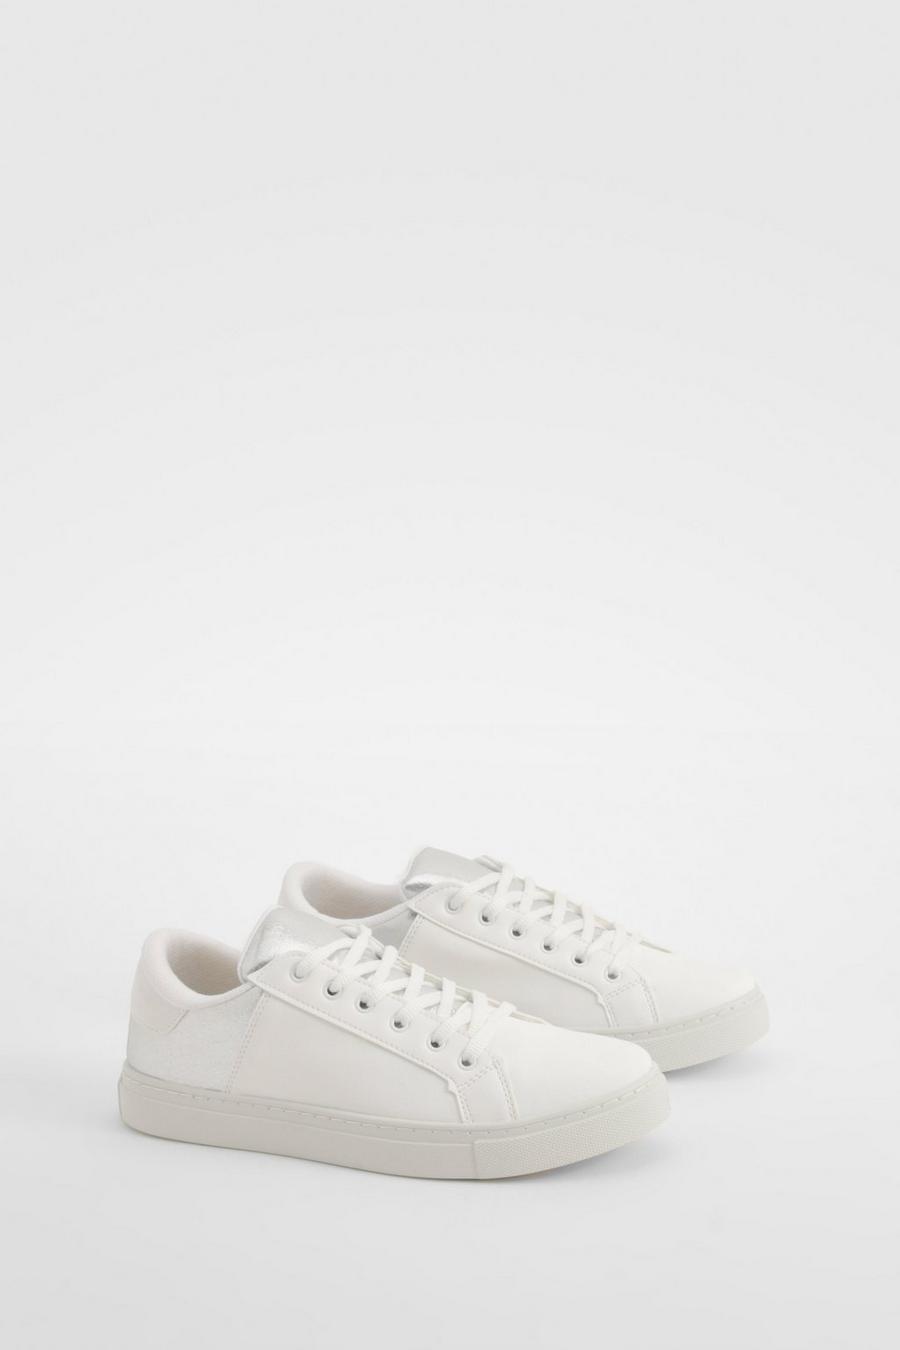 Silver Contrast Panel Basic Flat Sneakers